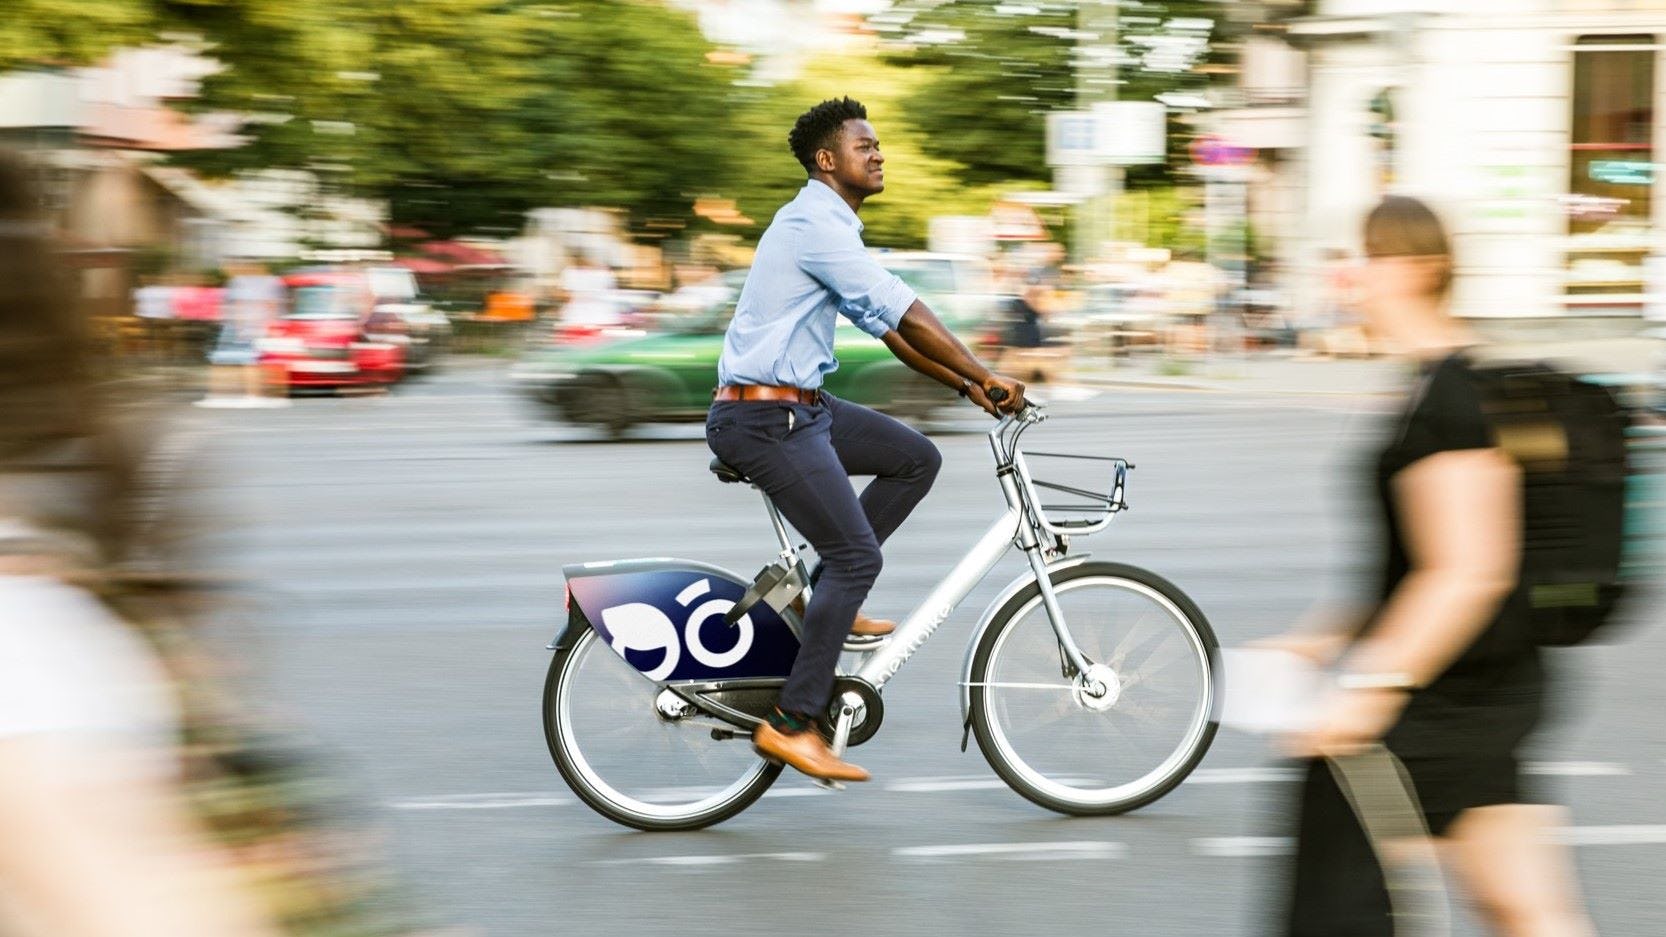 The ownership change is followed up with an immediate name change from ‘Nextbike by Tier’ back to ‘Nextbike’ as the company rebrands. – Photo Nextbike